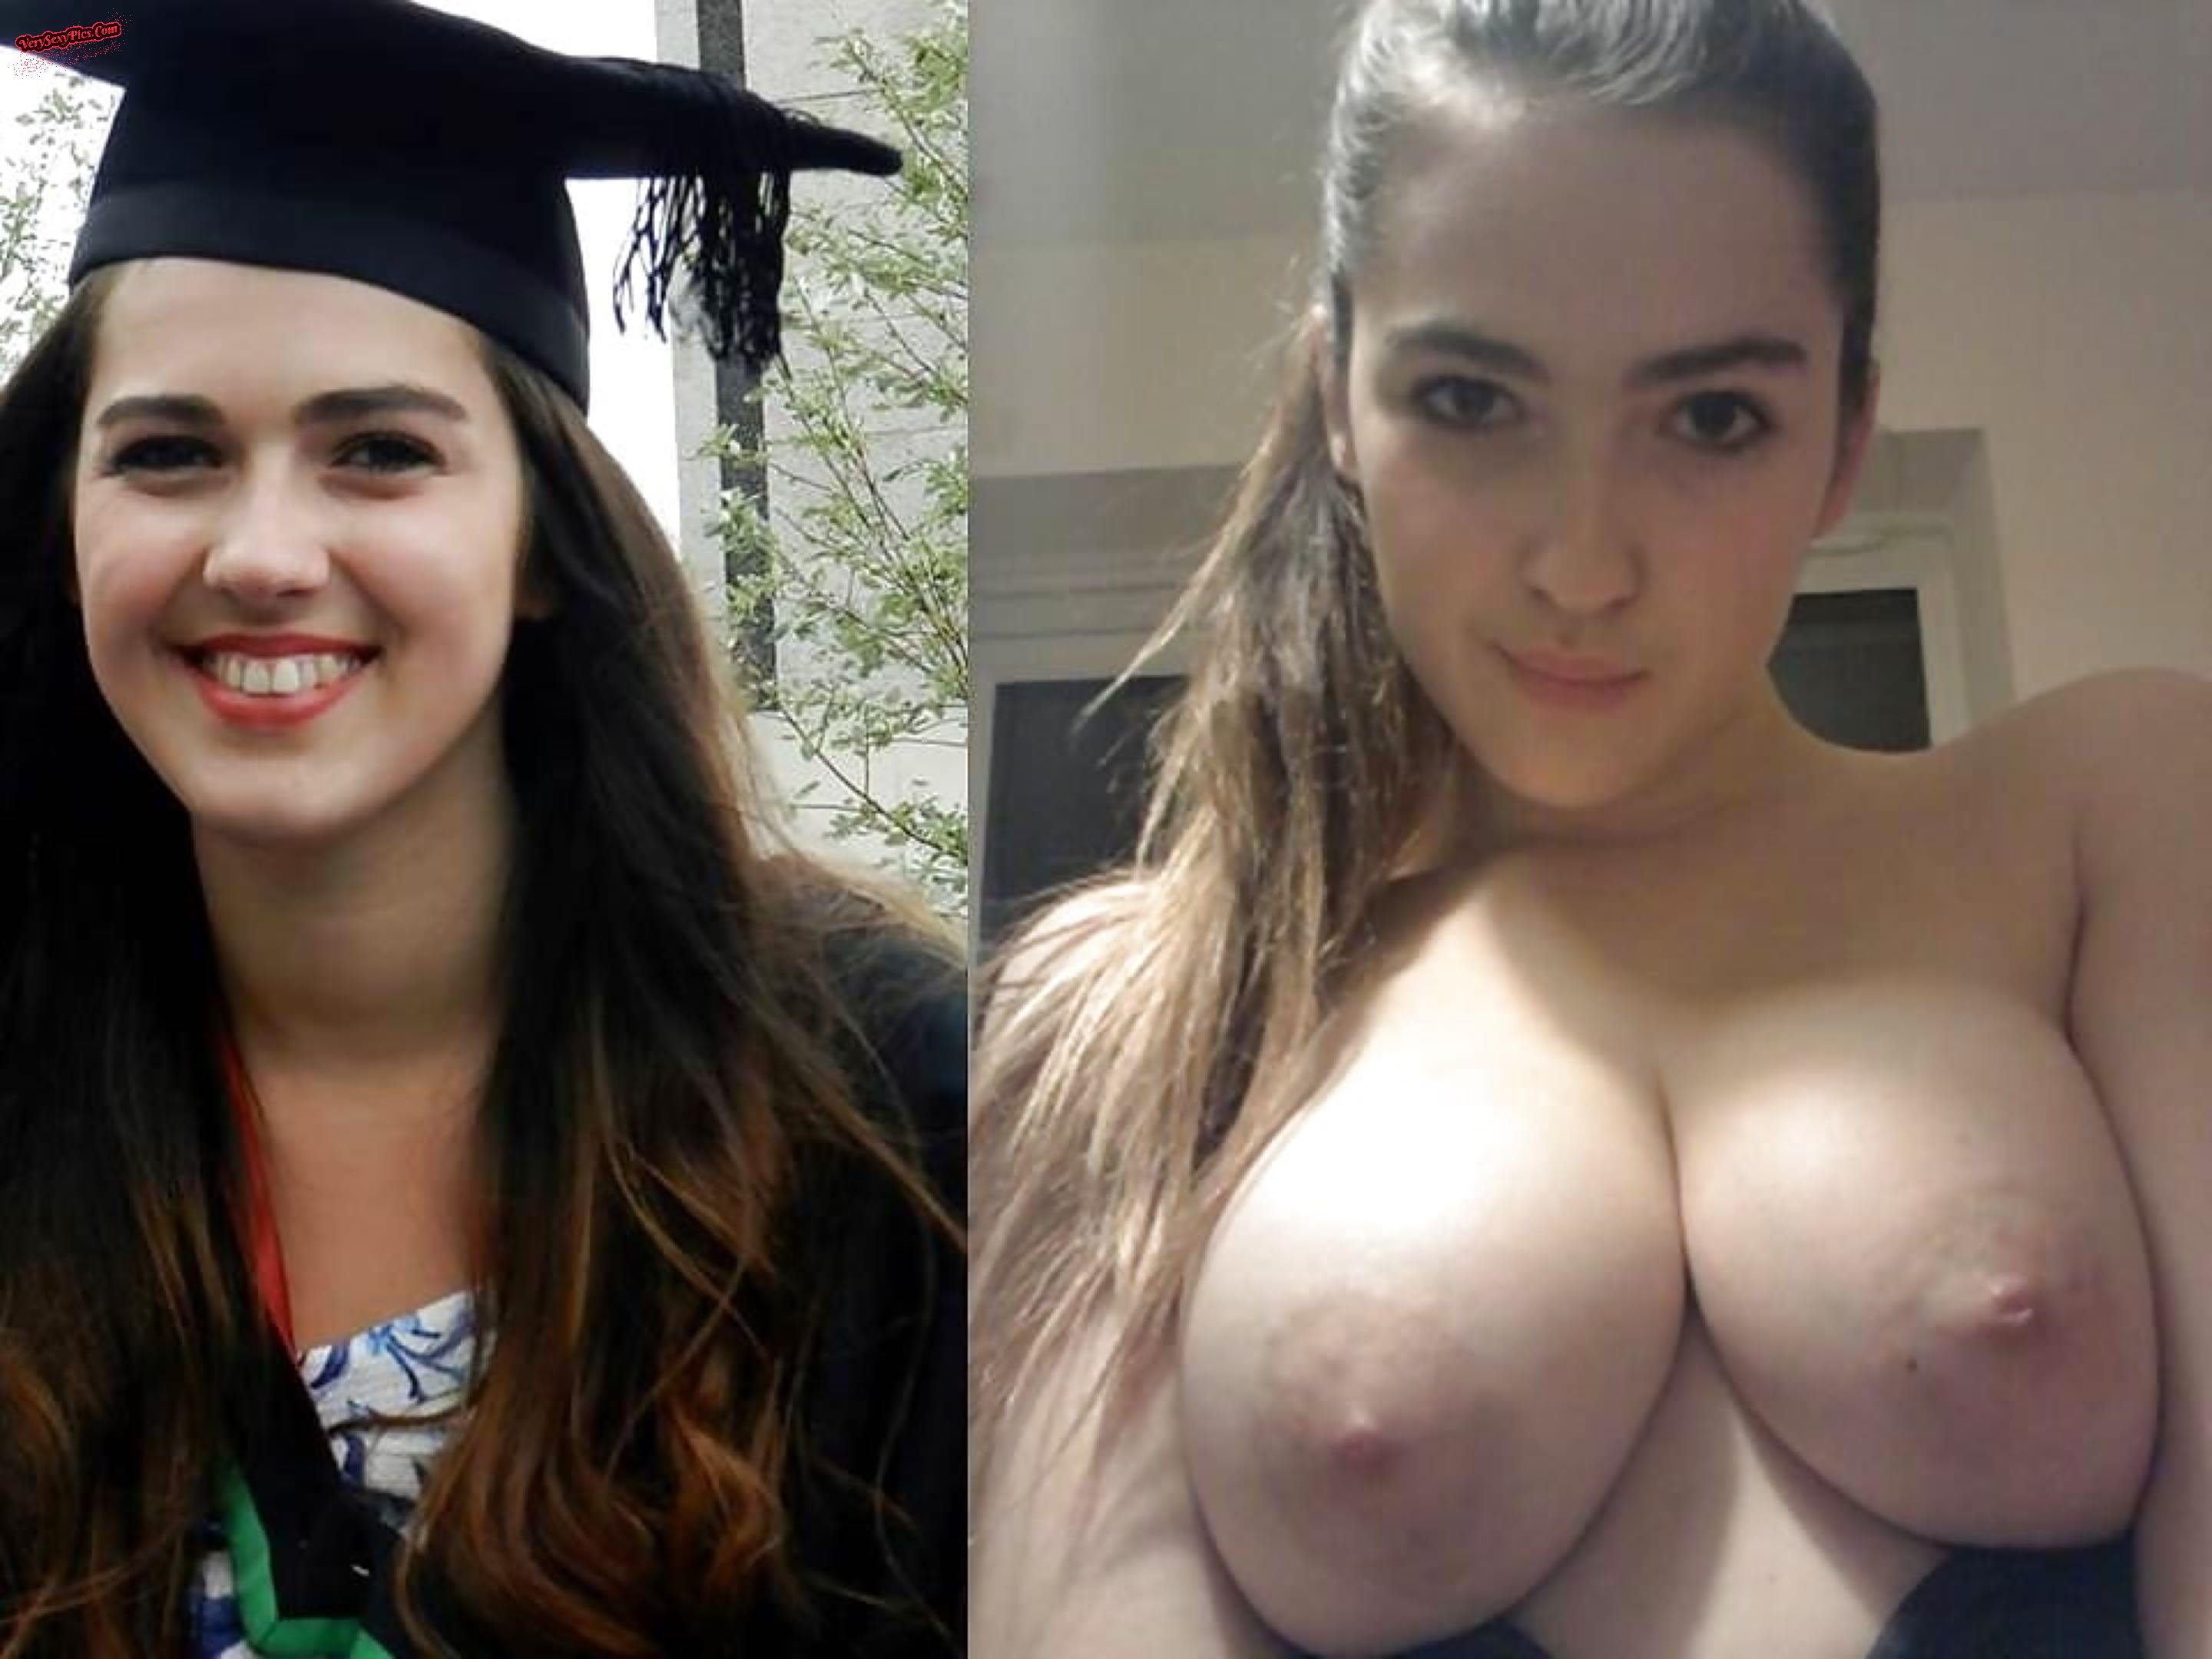 DRESSED/UNDRESSED Sweet Ladys With Big Round Juicy Boobs